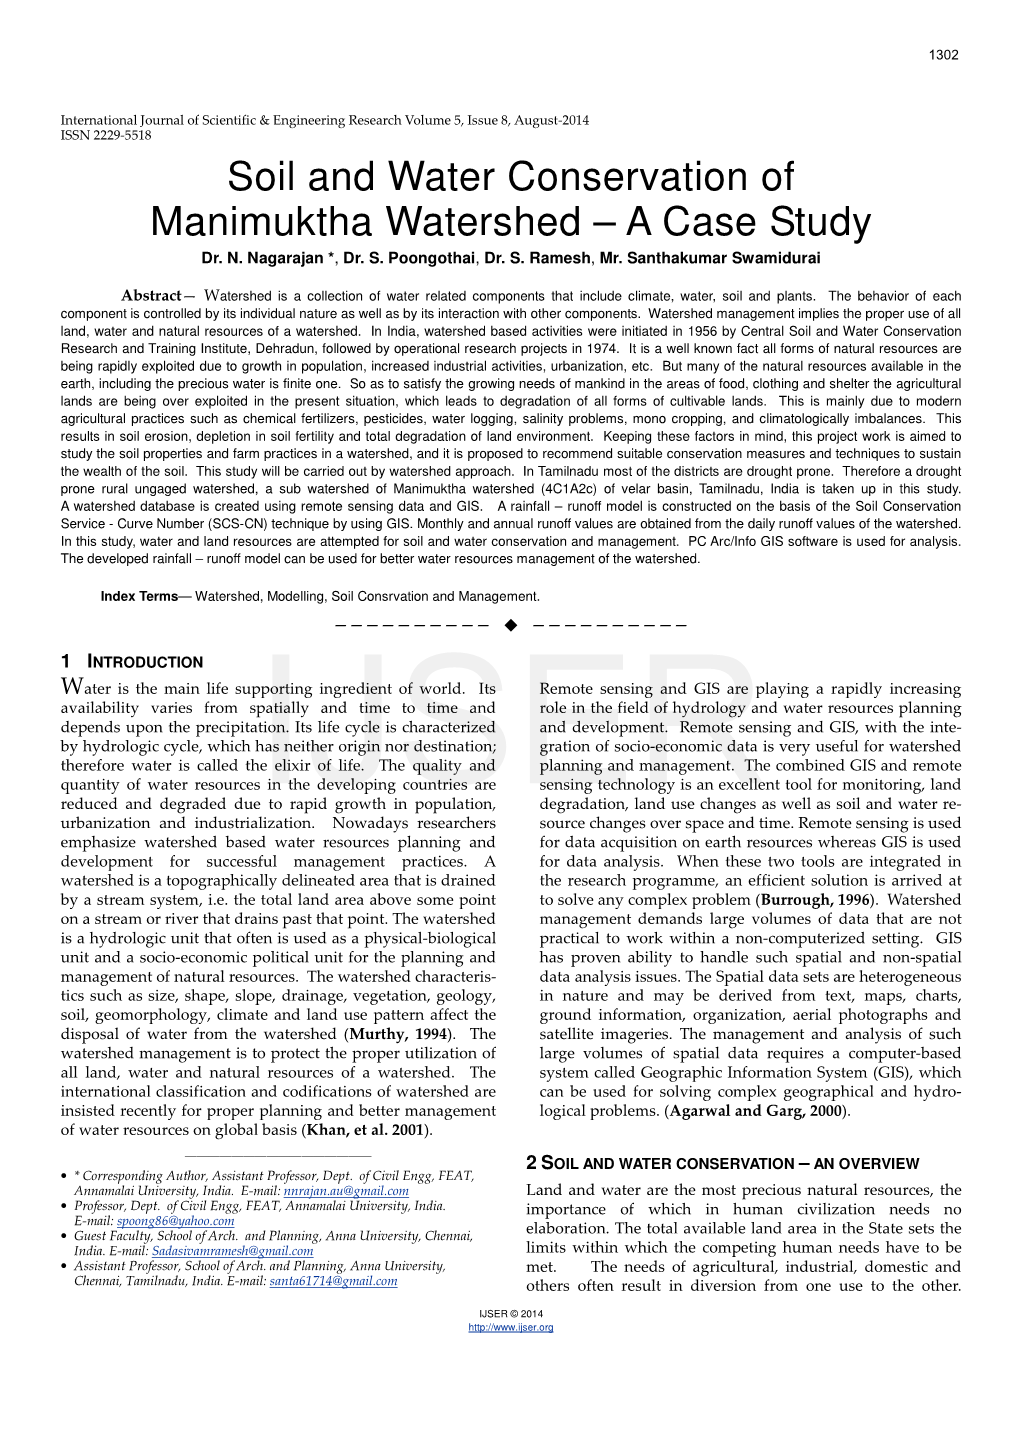 Soil and Water Conservation of Manimuktha Watershed – a Case Study Dr